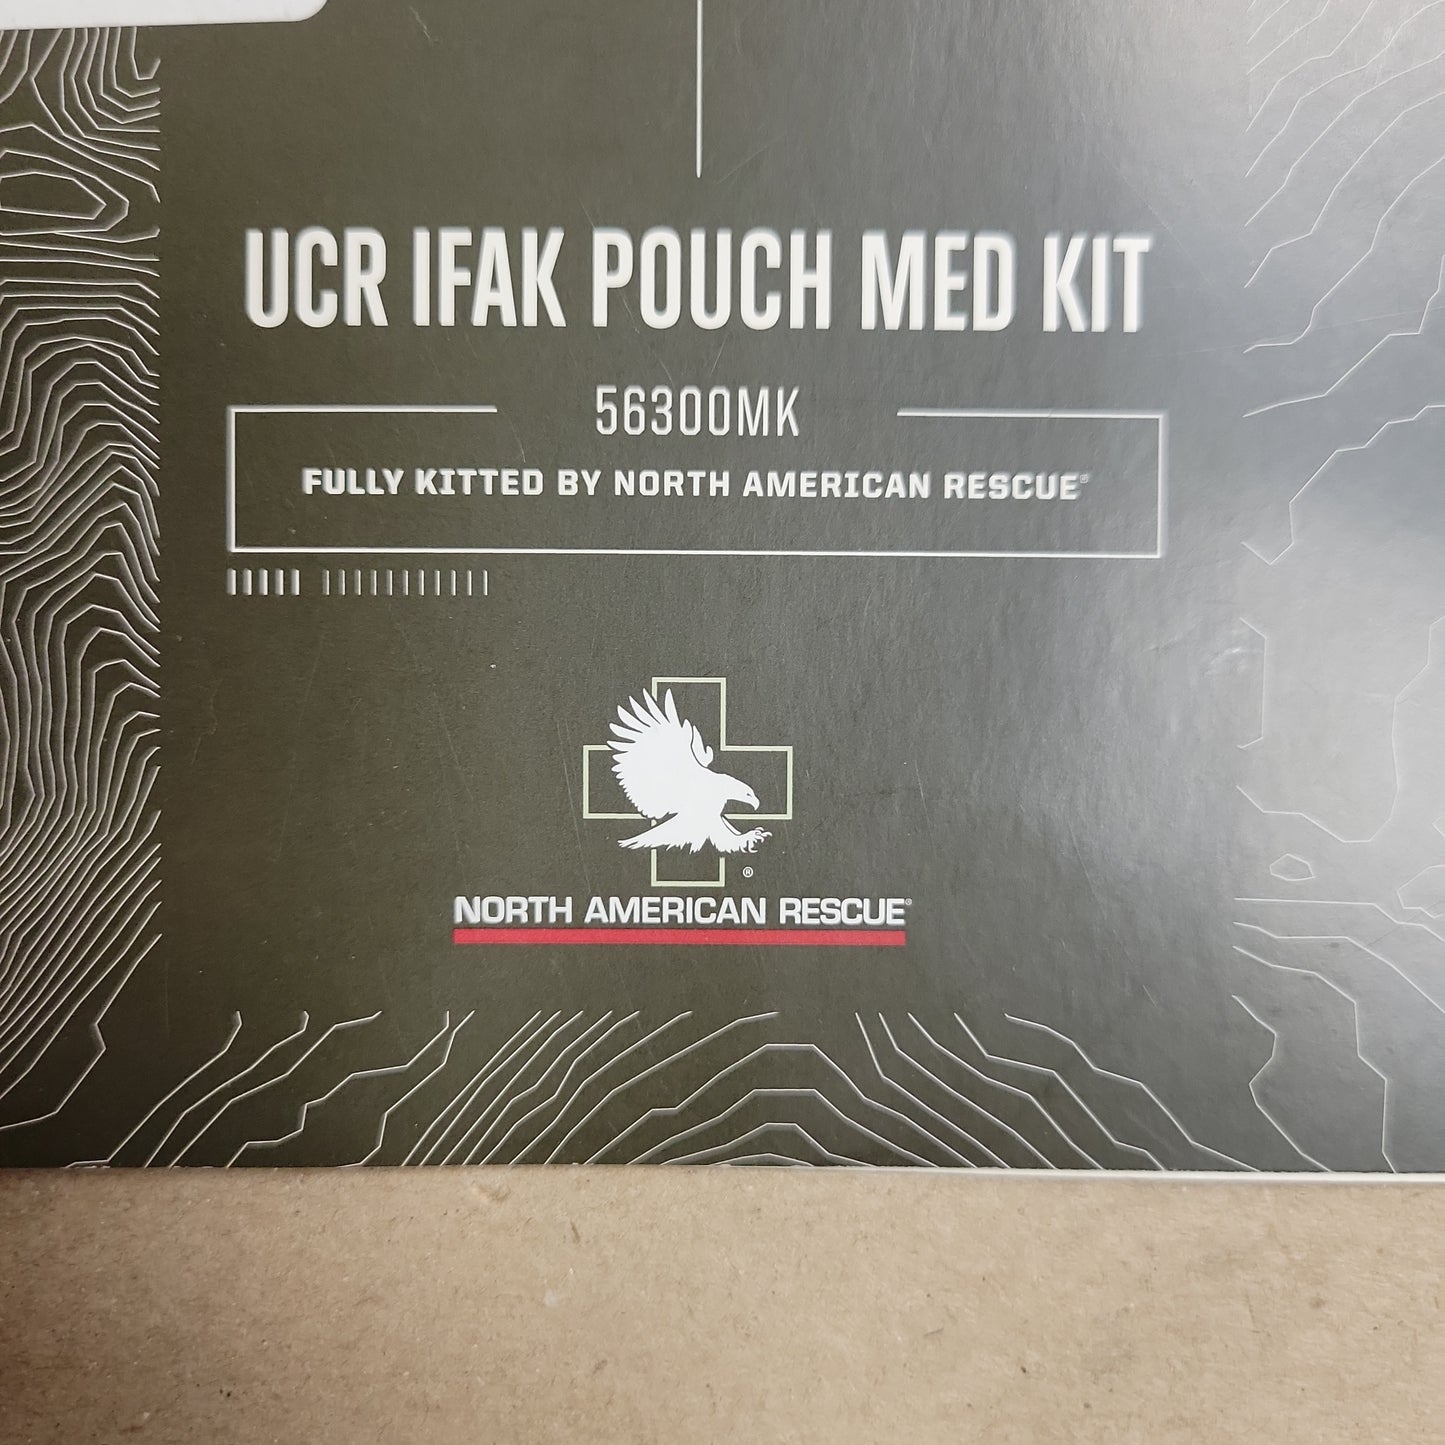 5.11 Med Kit Pouch : UCR IFAK Black, with Med Kit 56300MK *Out of Date 56300